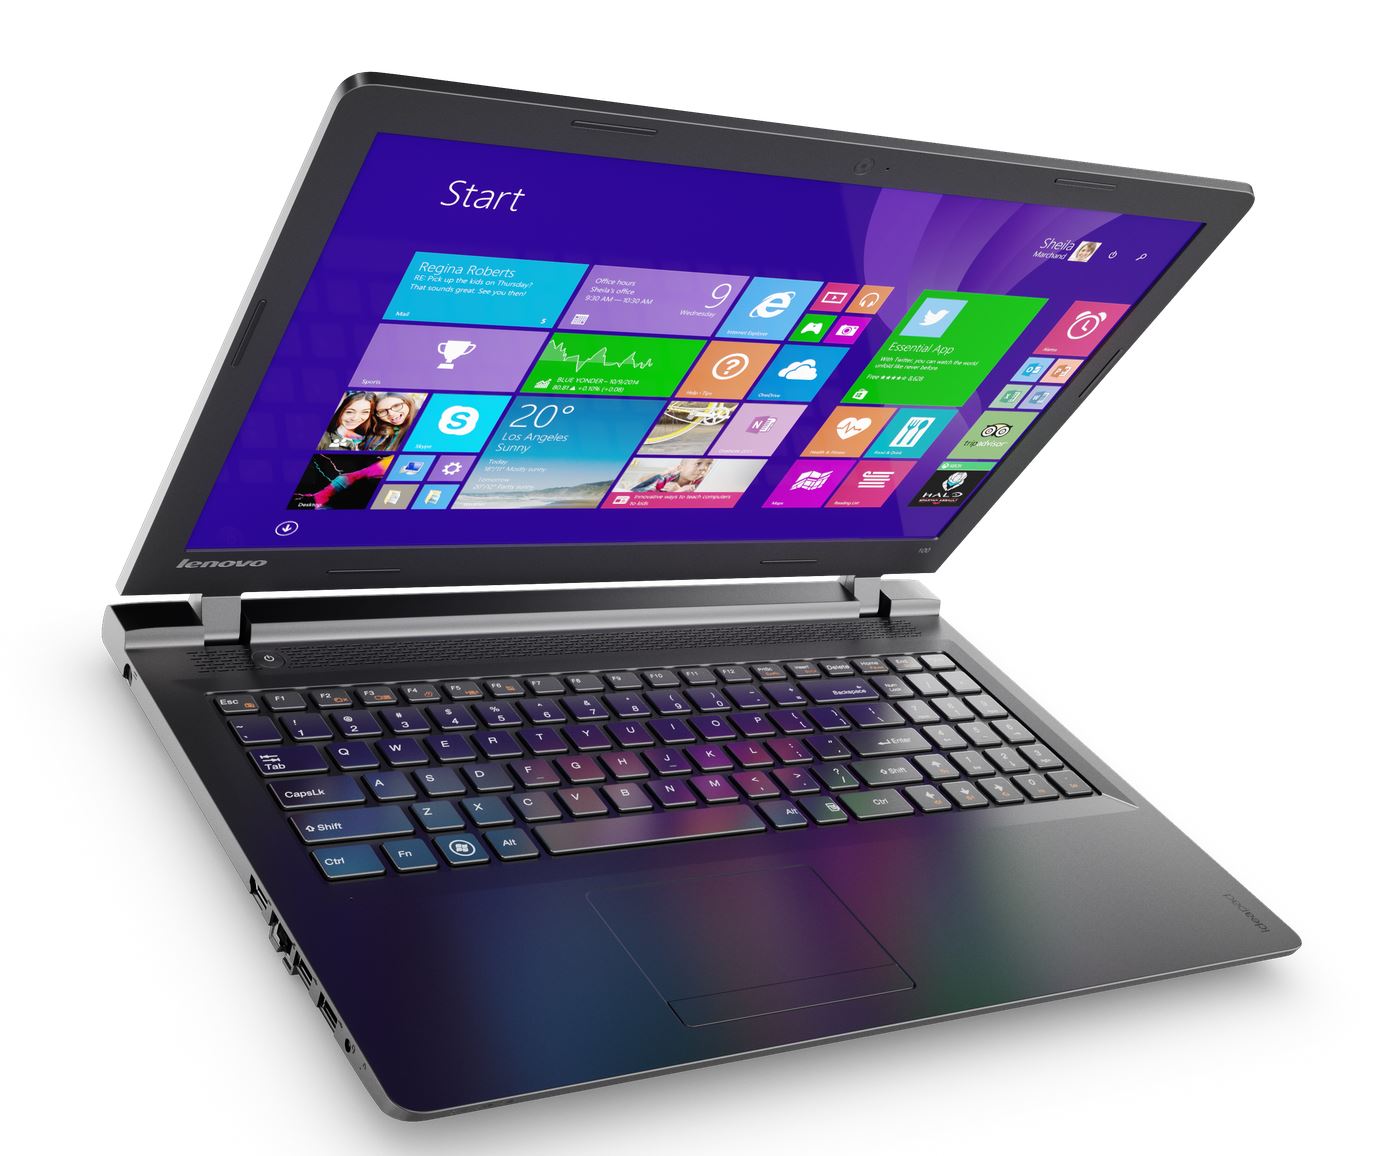 Lenovo announces new devices and more at Global Tech World Conference